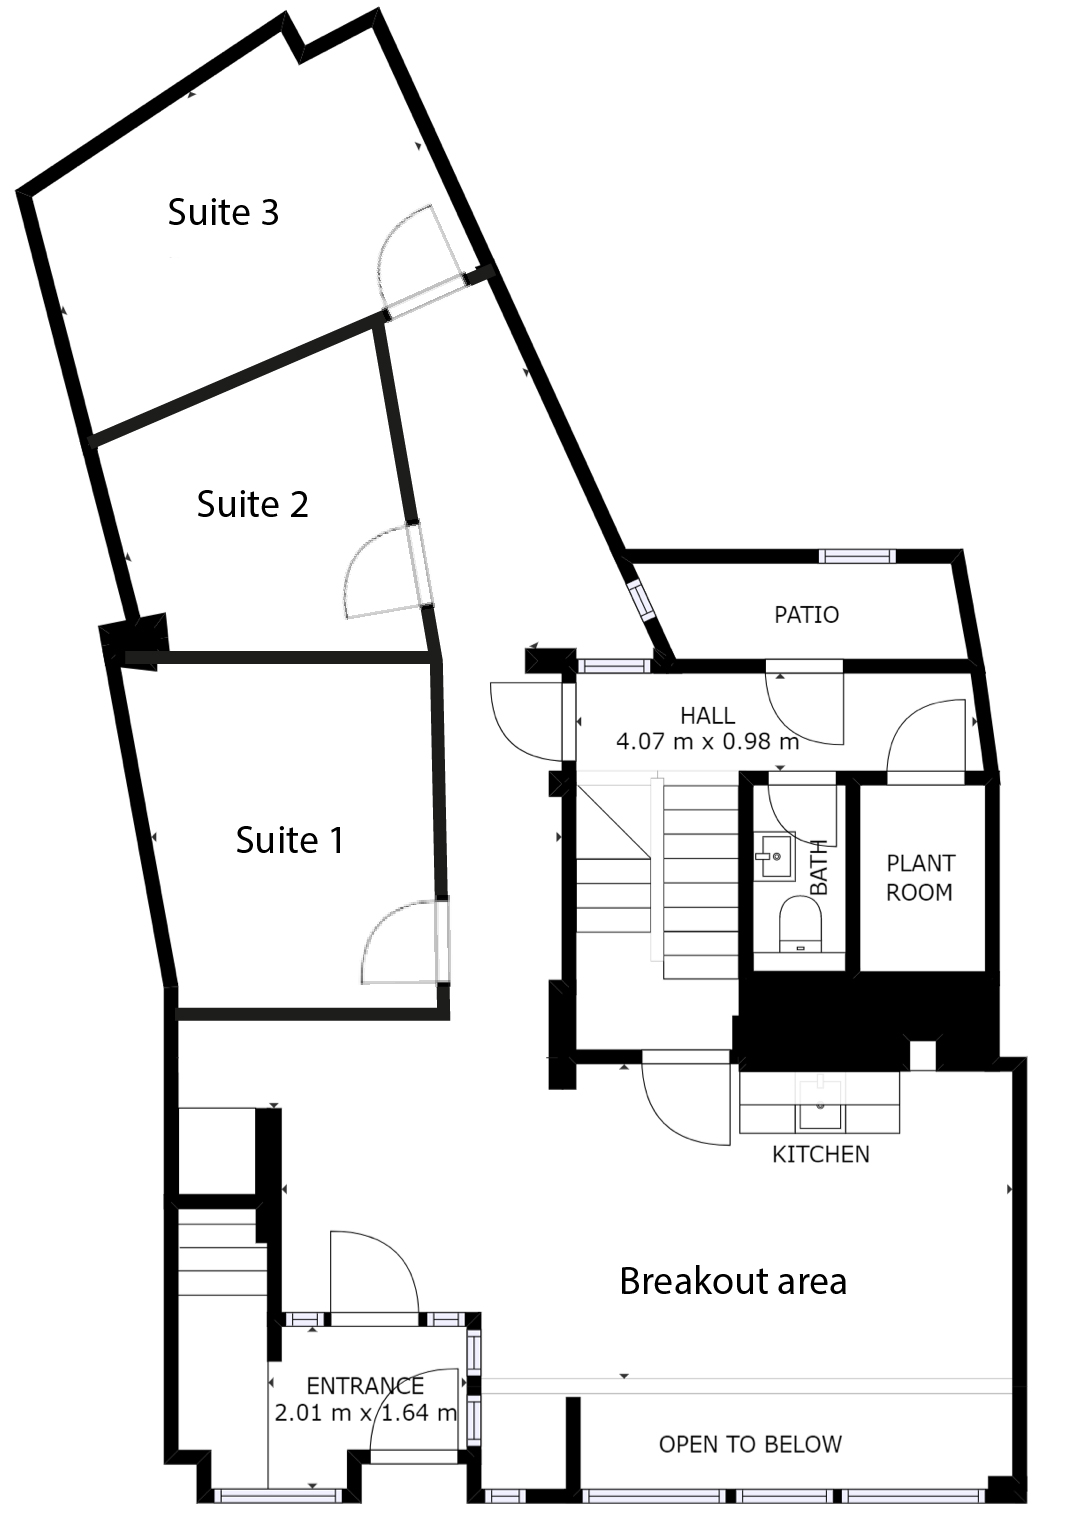 Merchant House Ground floor plan with coworking offices, coworking meeting room and private office suites. 